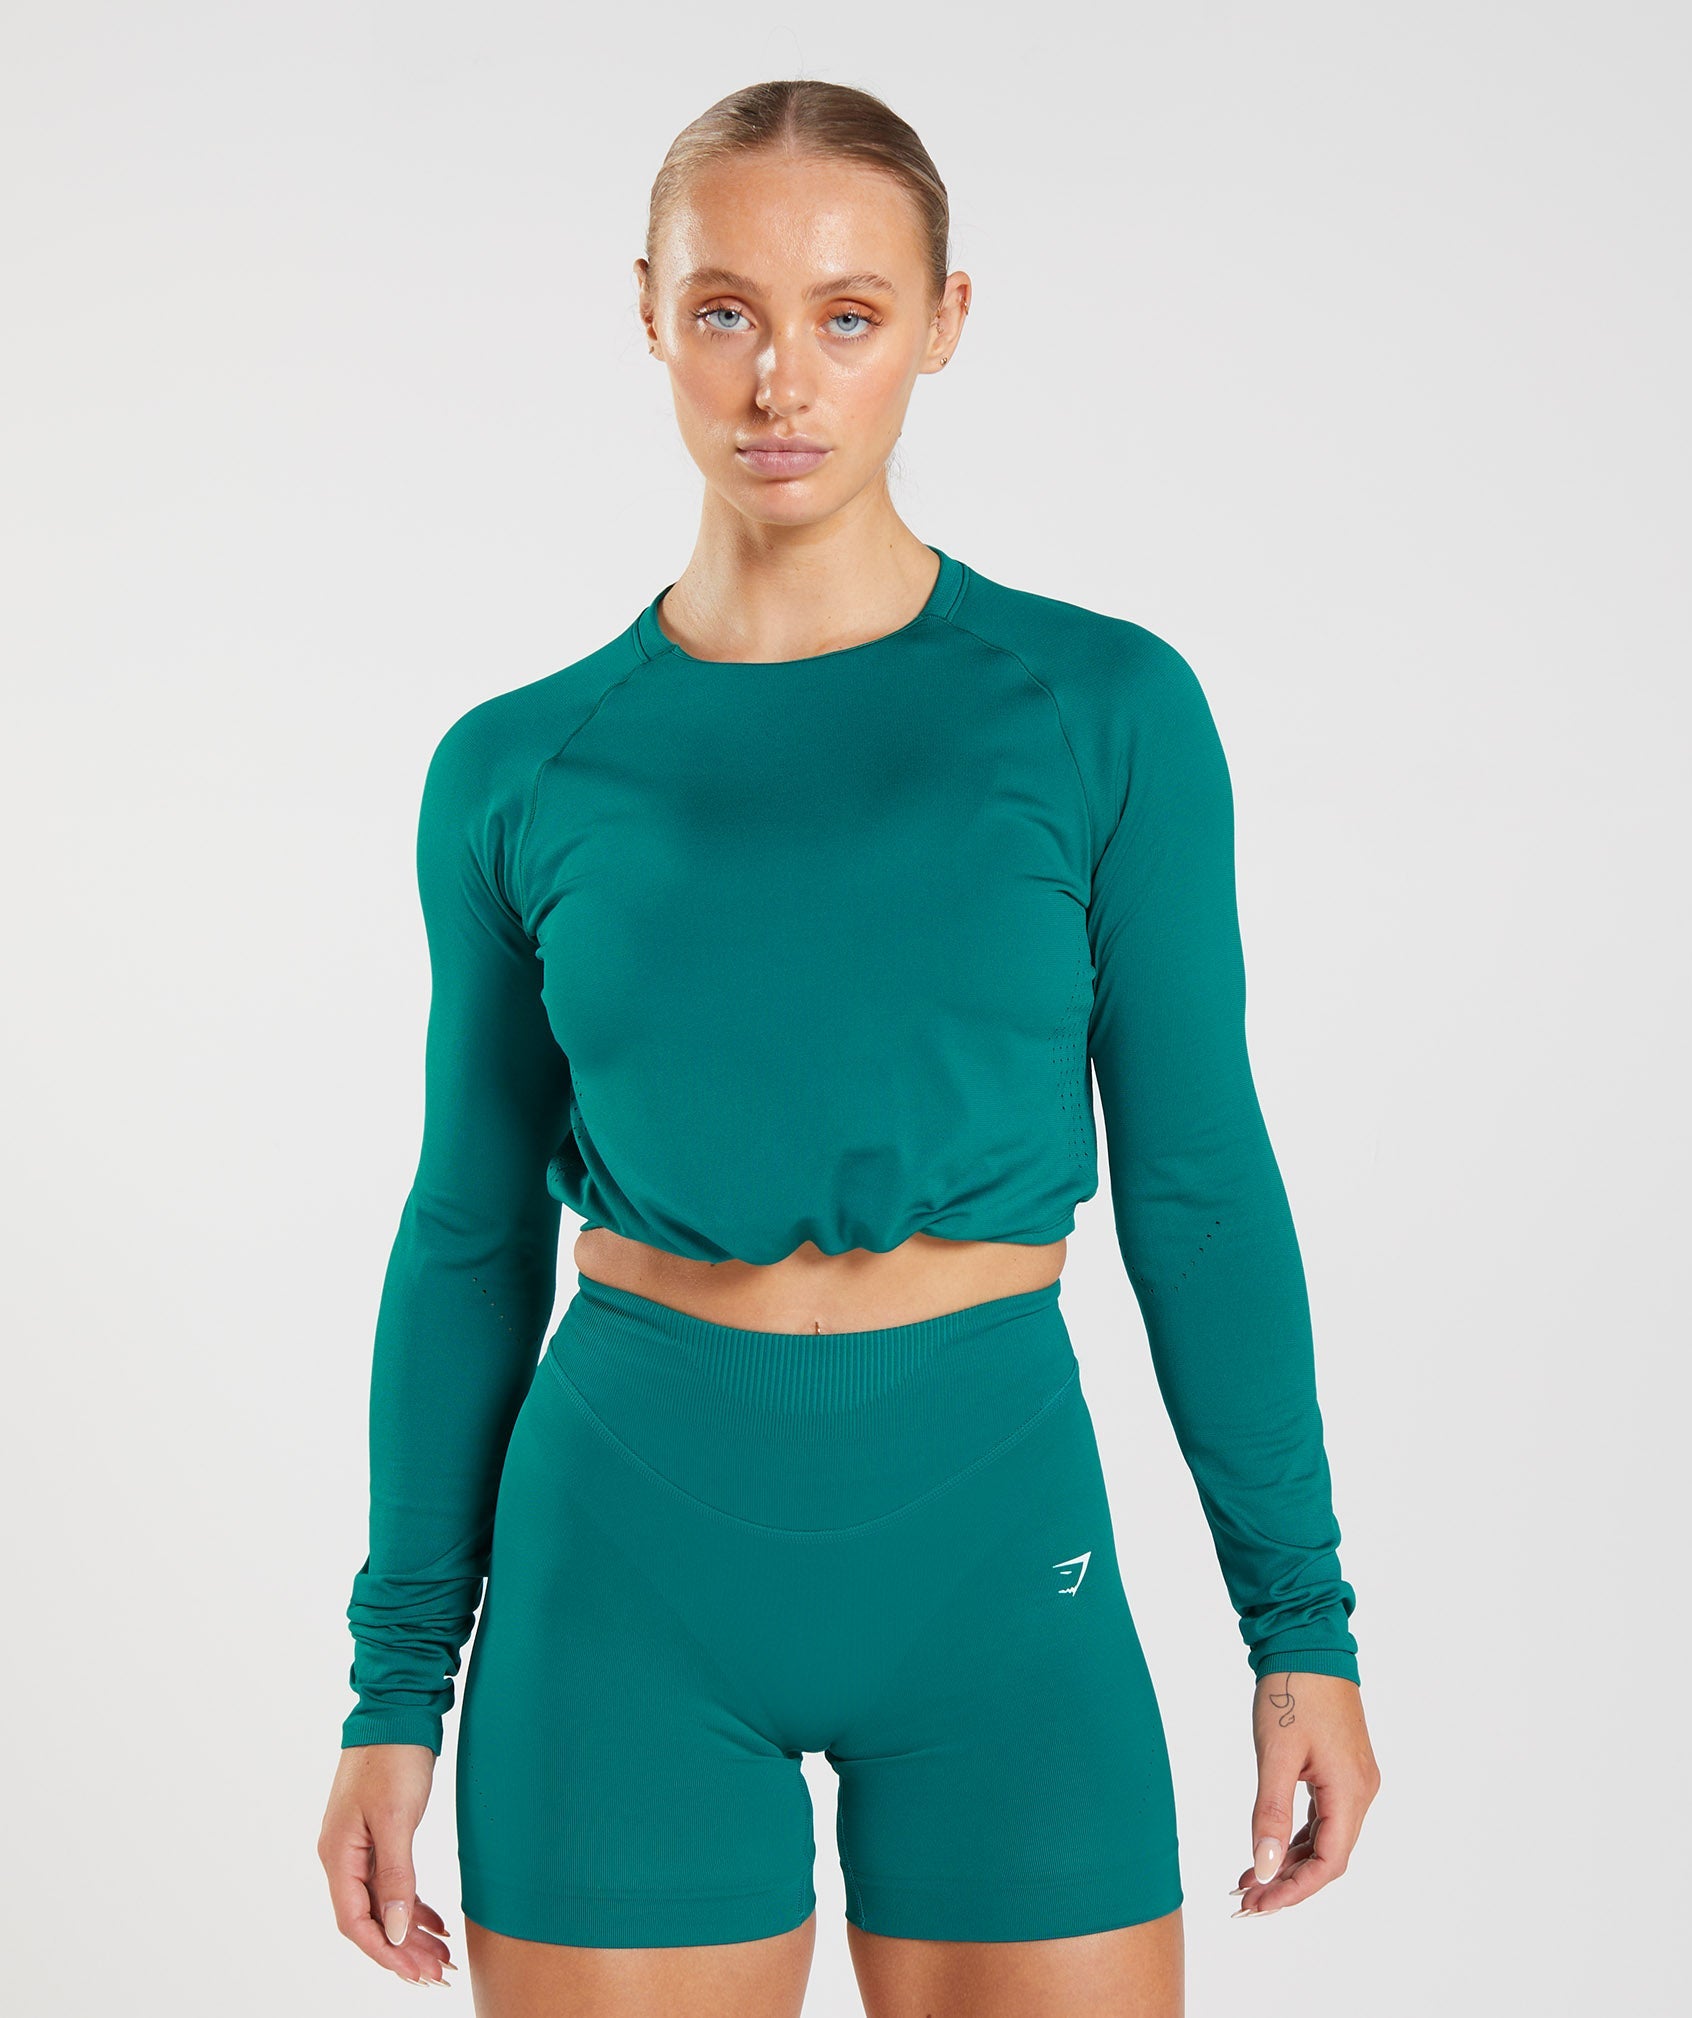 Sweat Seamless Long Sleeve Crop Top in Rich Teal - view 1